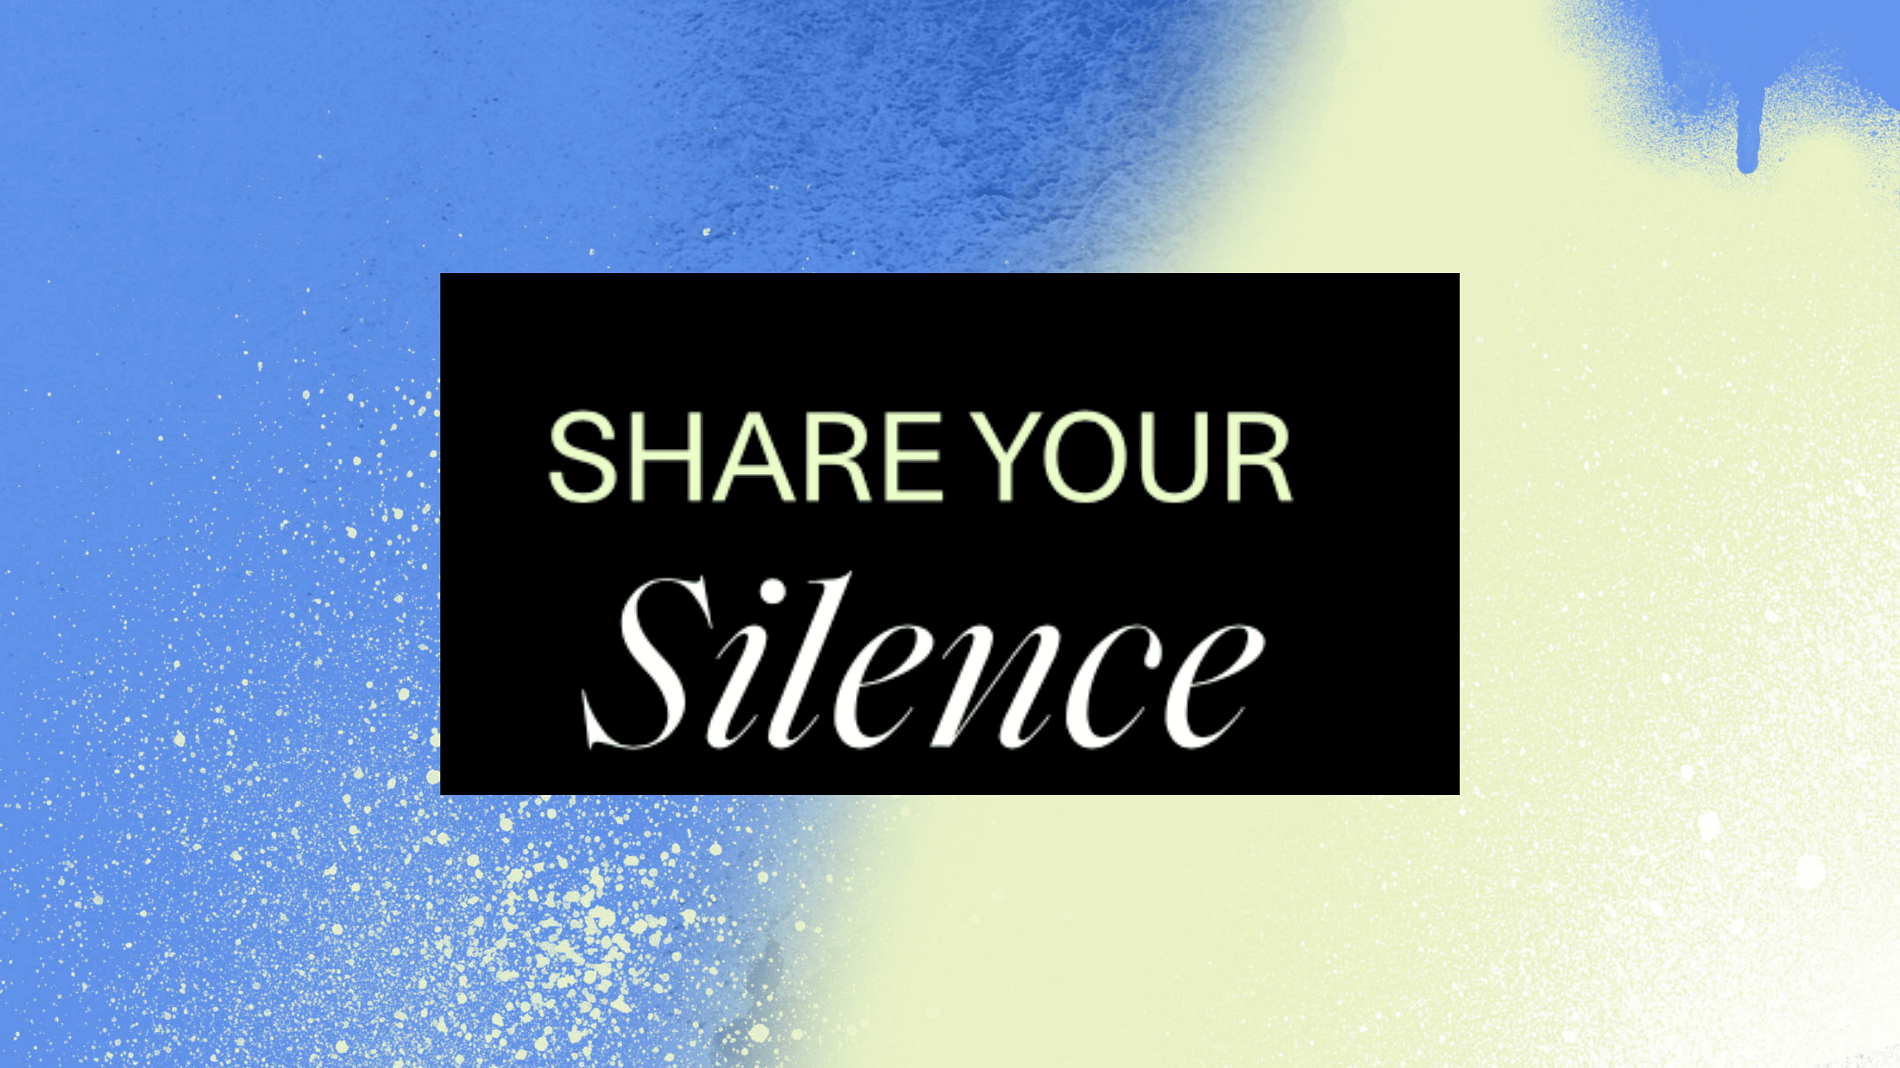 Share your silence with The Big Silence